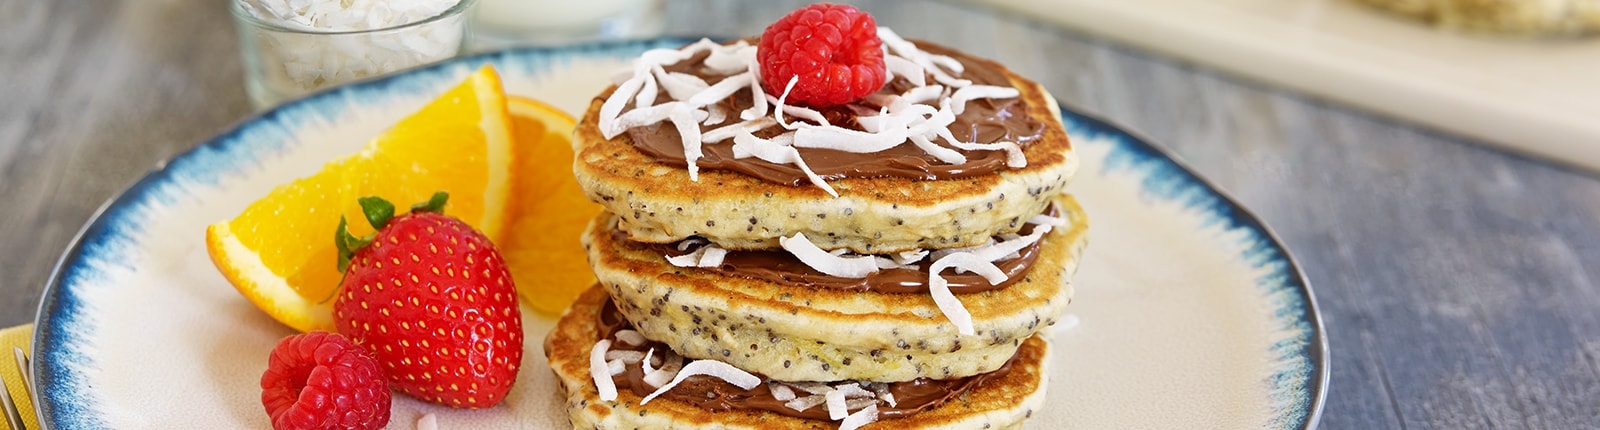 Oatcake towers with lemon, poppy seed and Nutella<sup>®</sup>